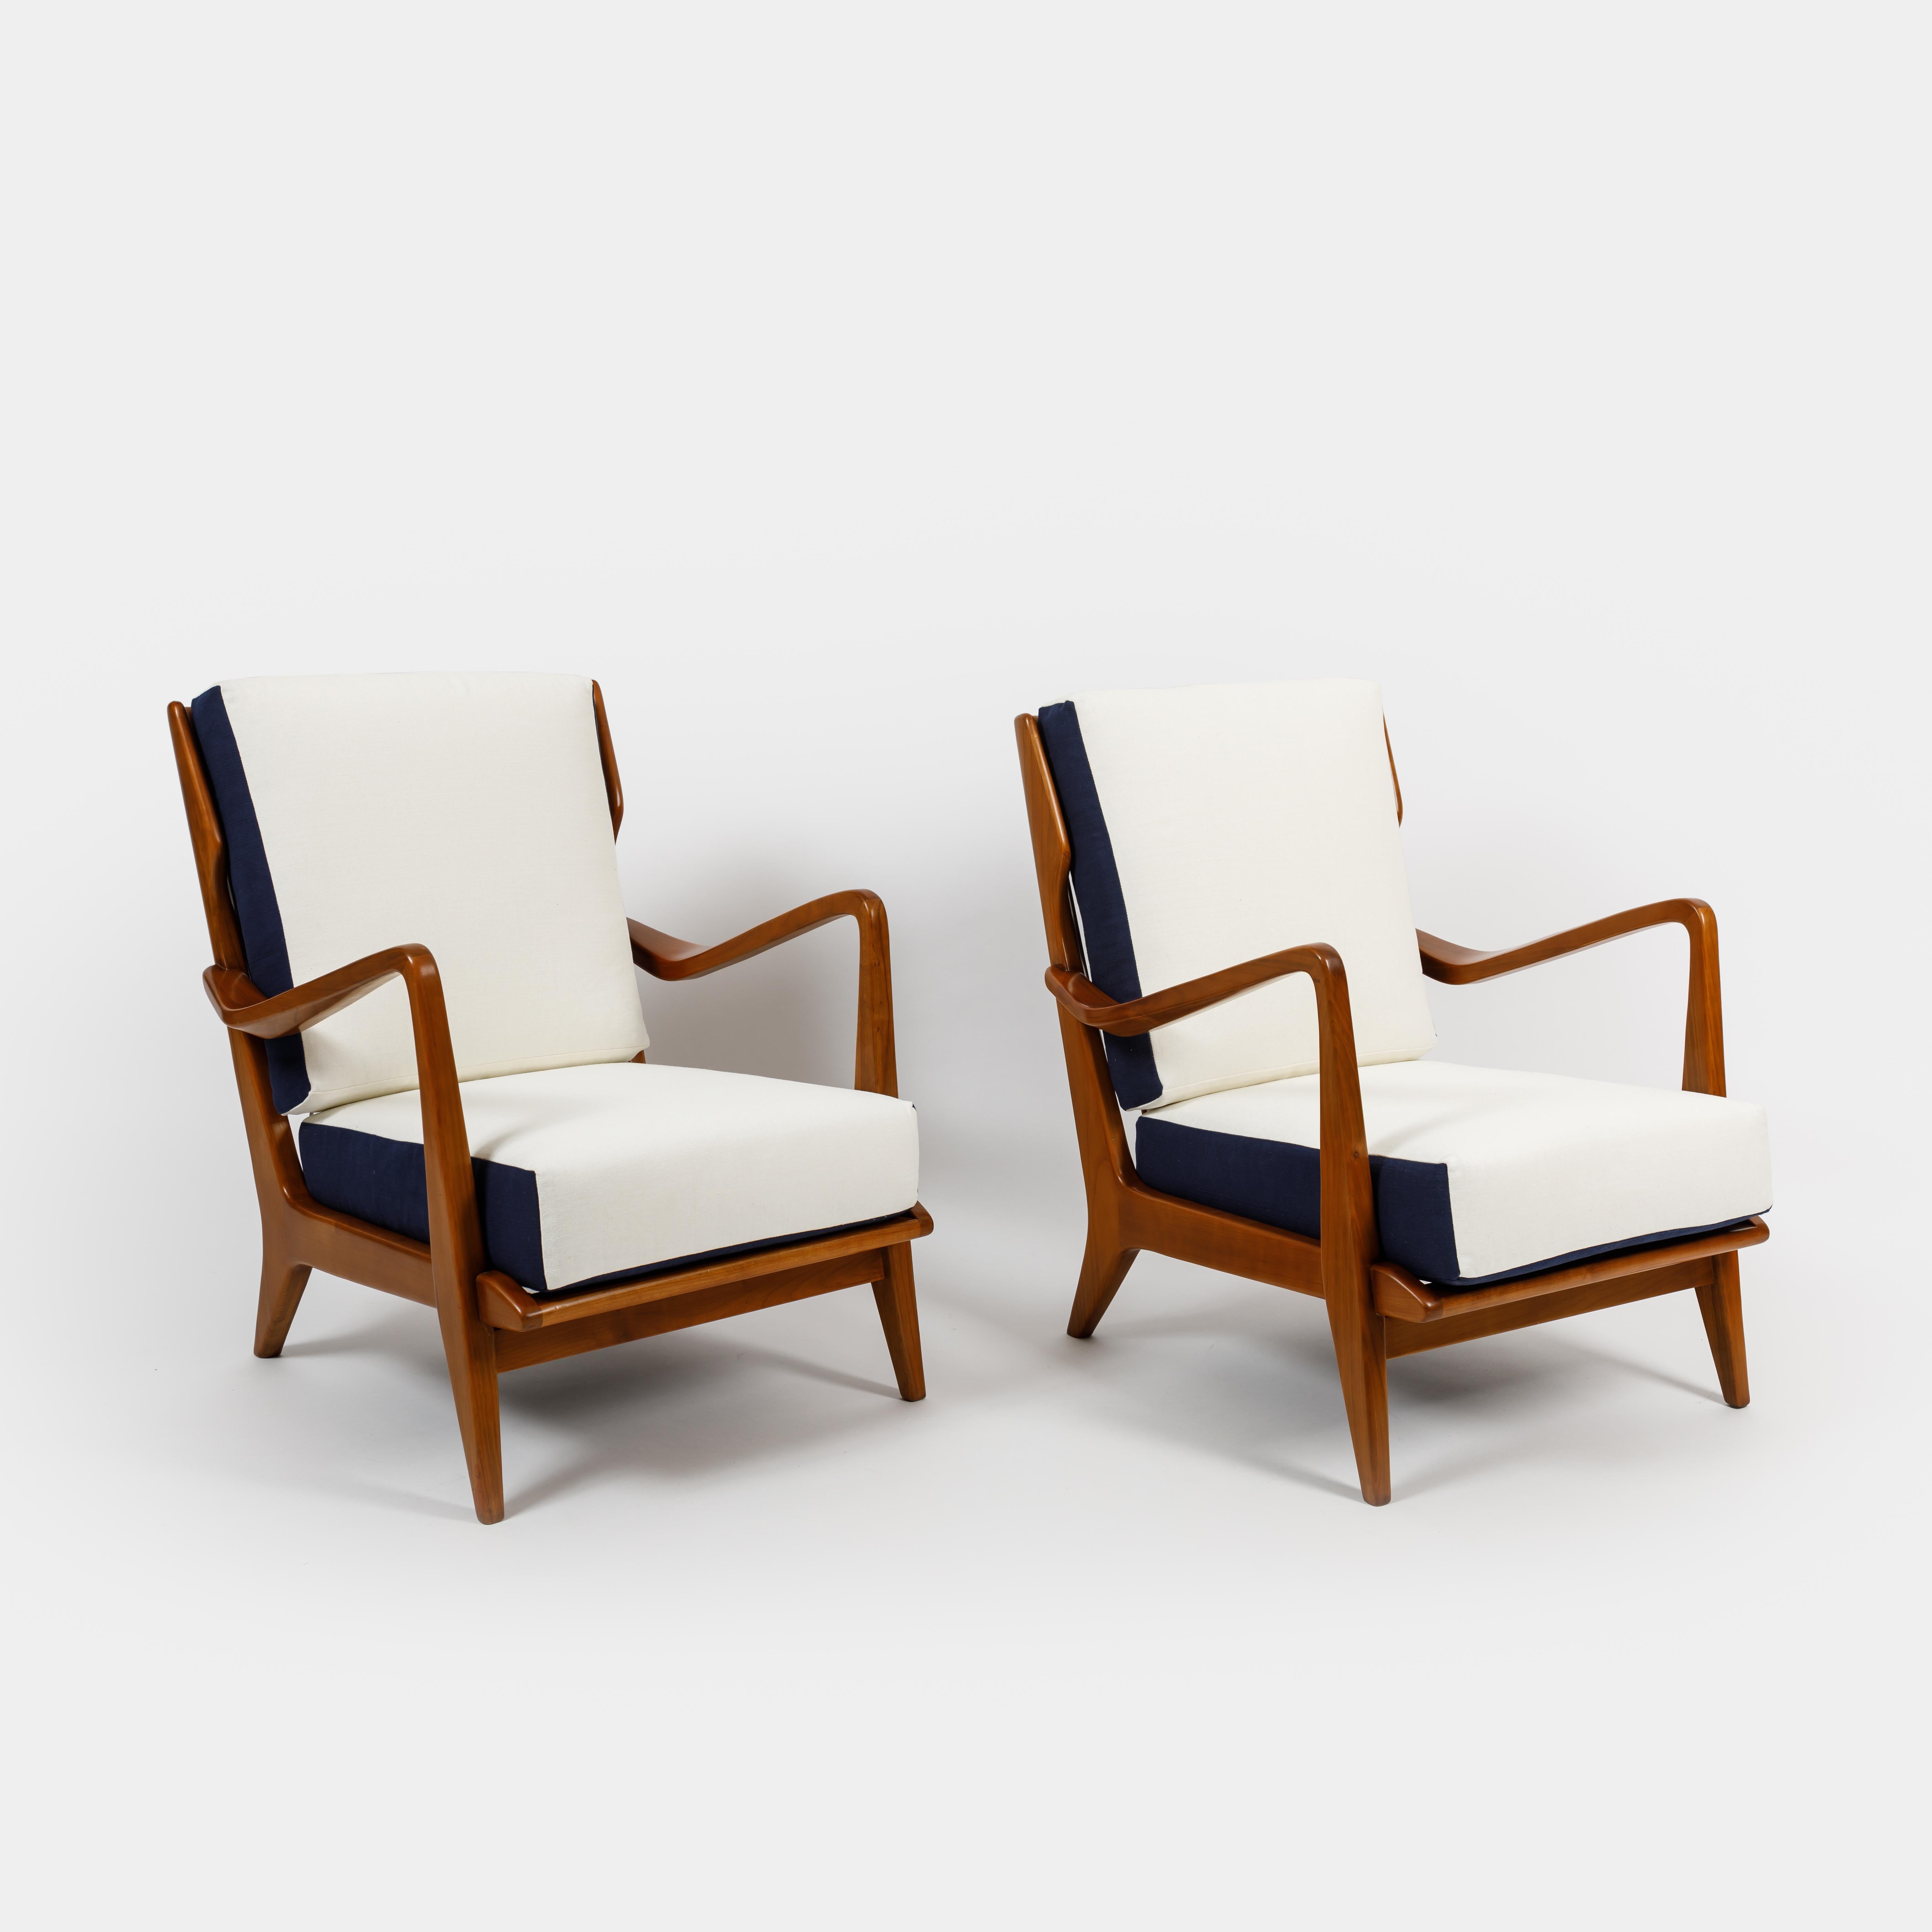 Designed by Gio Ponti and manufactured by Cassina model 516 pair of sculptural armchairs or lounge chairs, with white and navy cotton linen upholstered cushions on walnut frames, Italy, 1950s. Great architectural details in the frame including